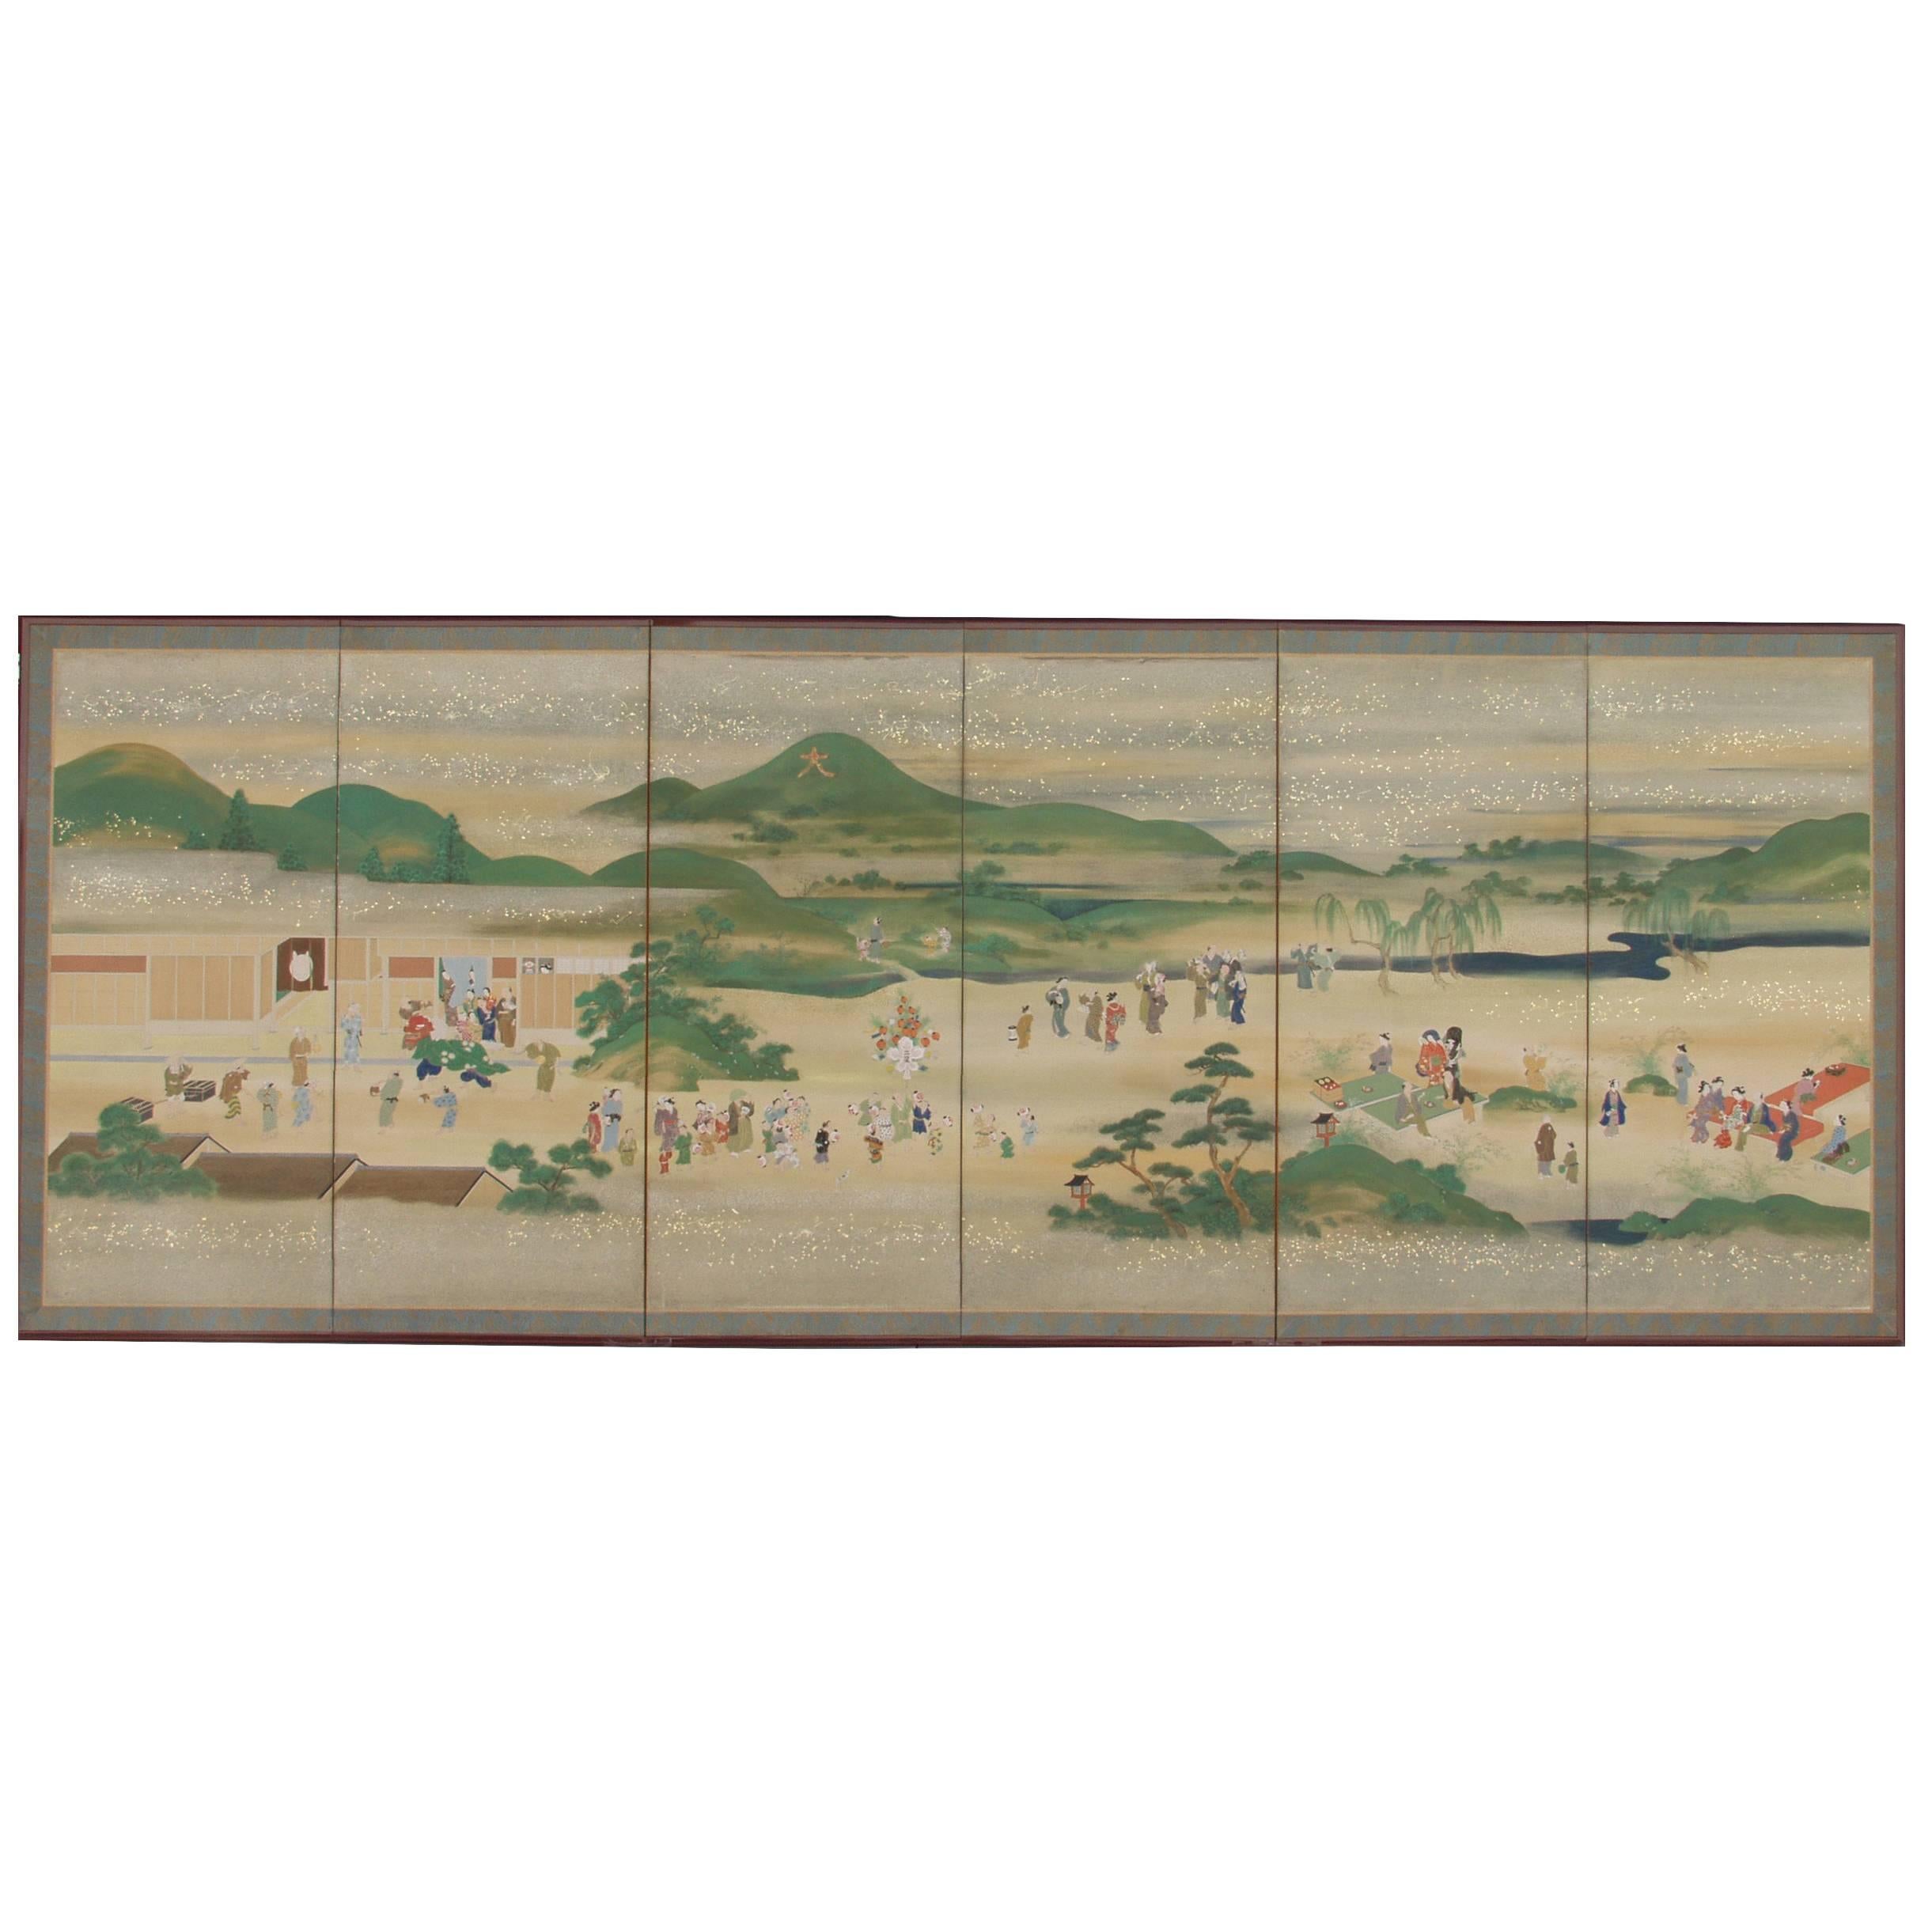 Seasonal Festivals in Kyoto, Painting For Sale